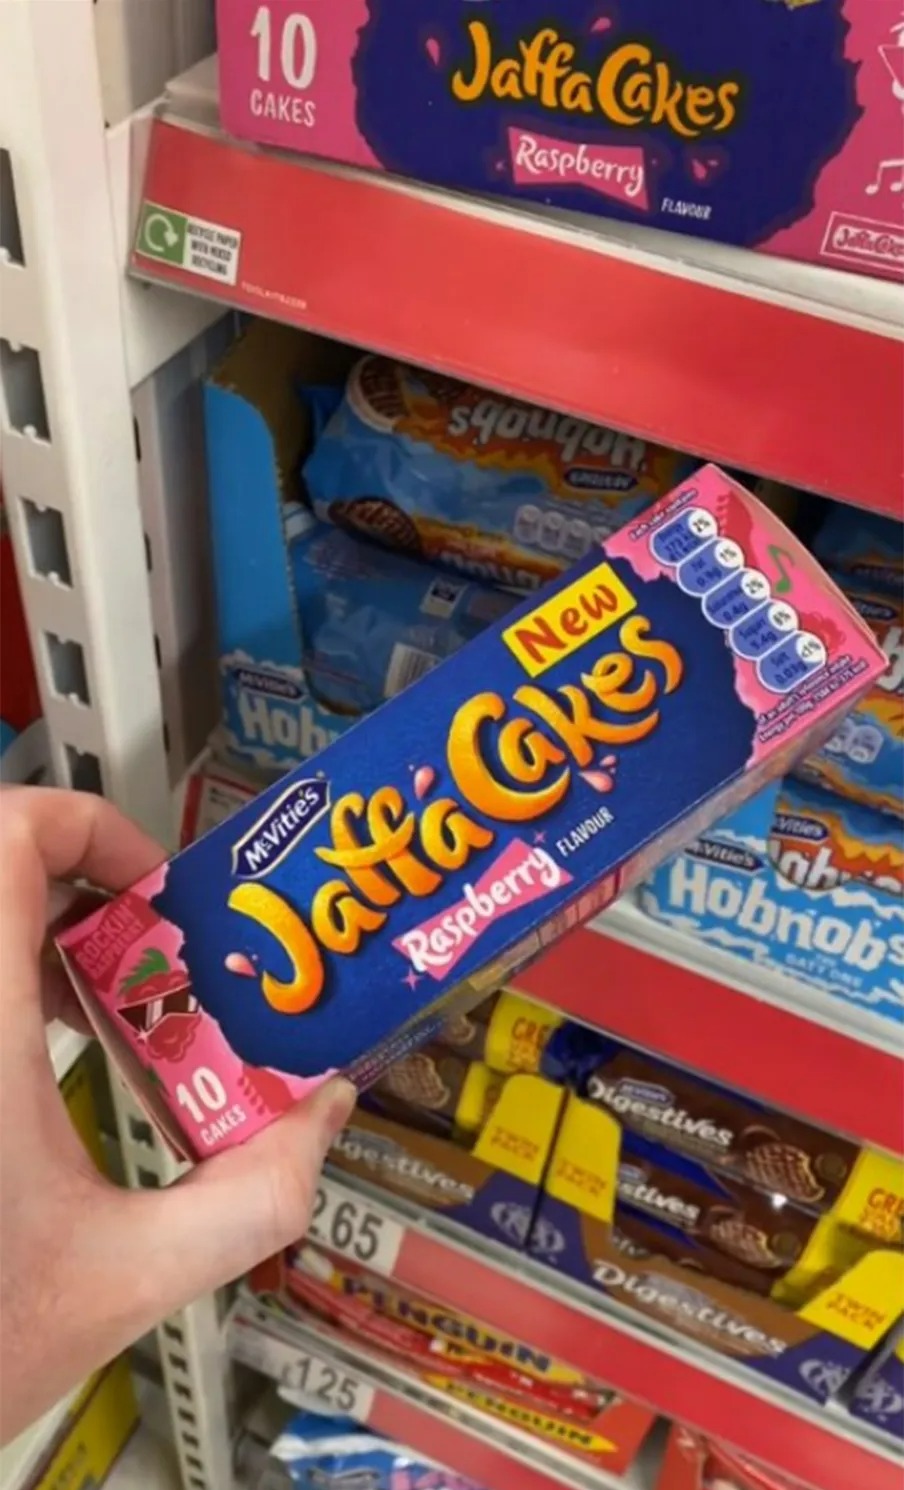 ‘A tangy twist’, cry fans over 85p packs of Jaffa Cakes in a unique flavour